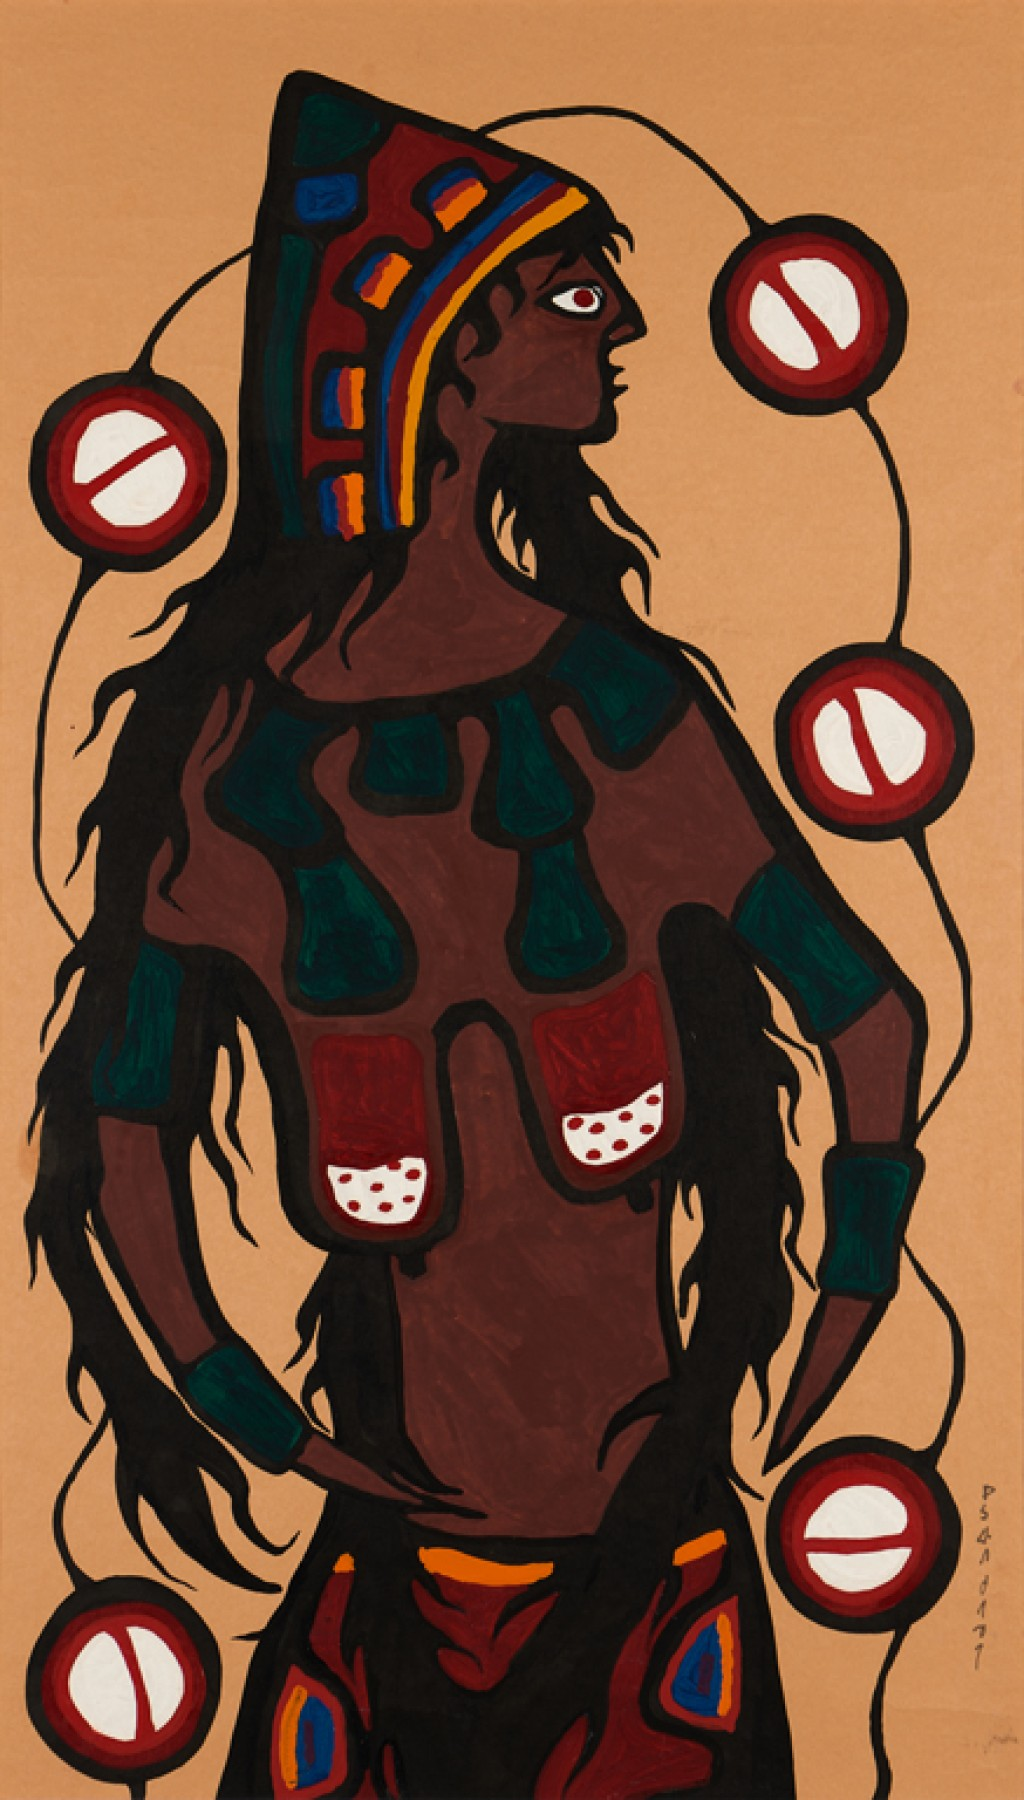 Painting of the sacred Mother Earth figure